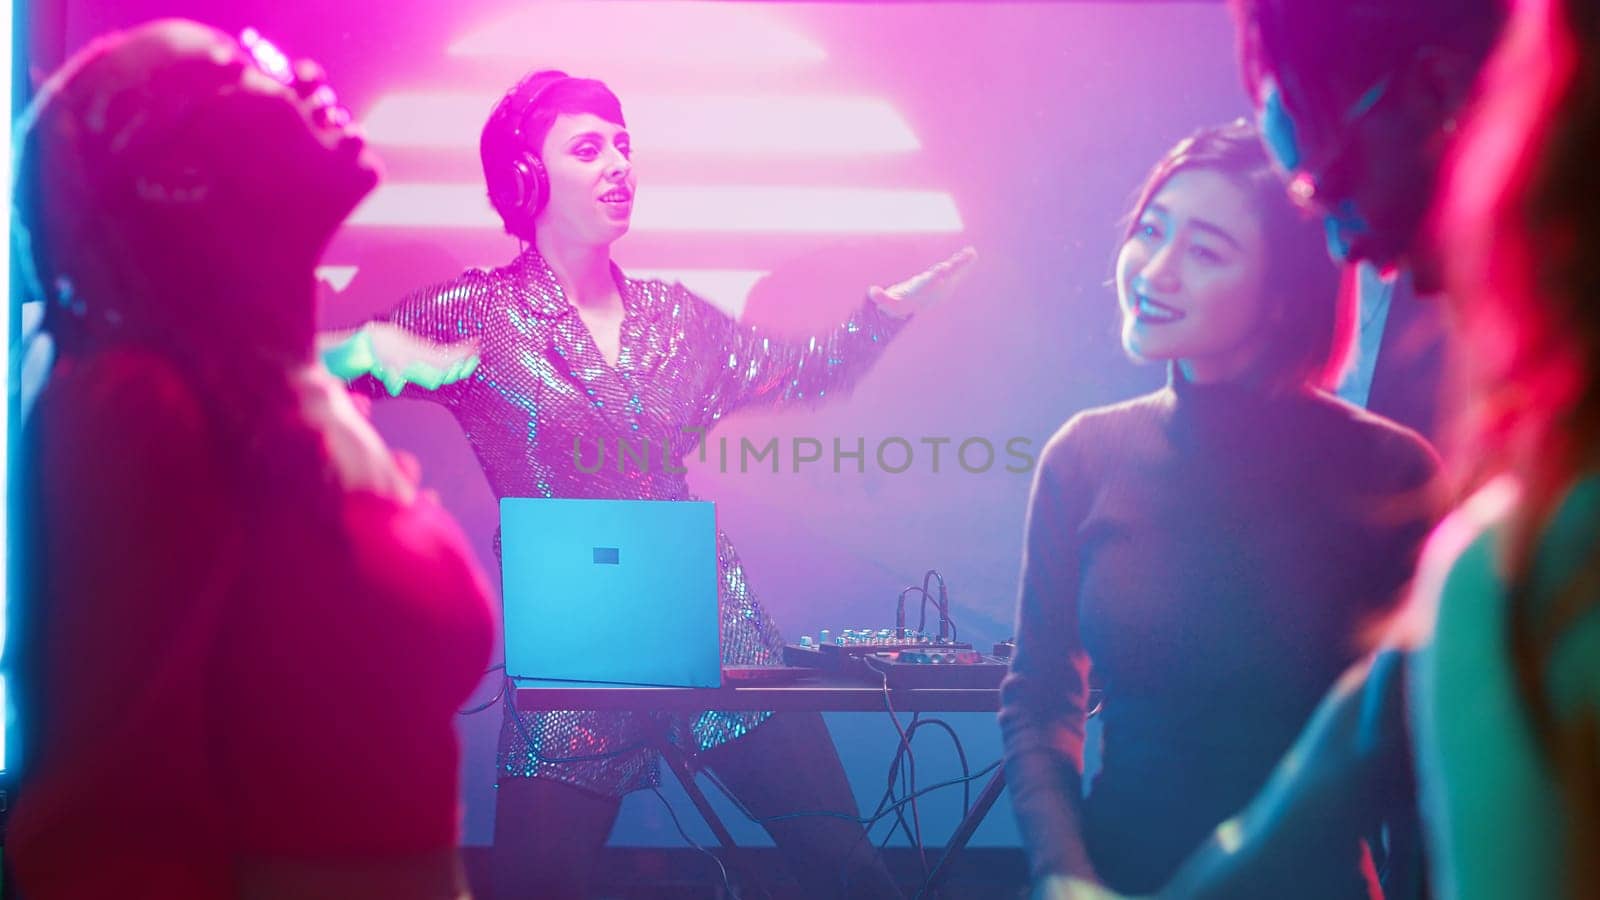 Funky female DJ mixing sounds on stage at club, dancing with group of friends at audio station. Young woman jumping with diverse people, enjoying night out at nightclub party. Tripod shot.